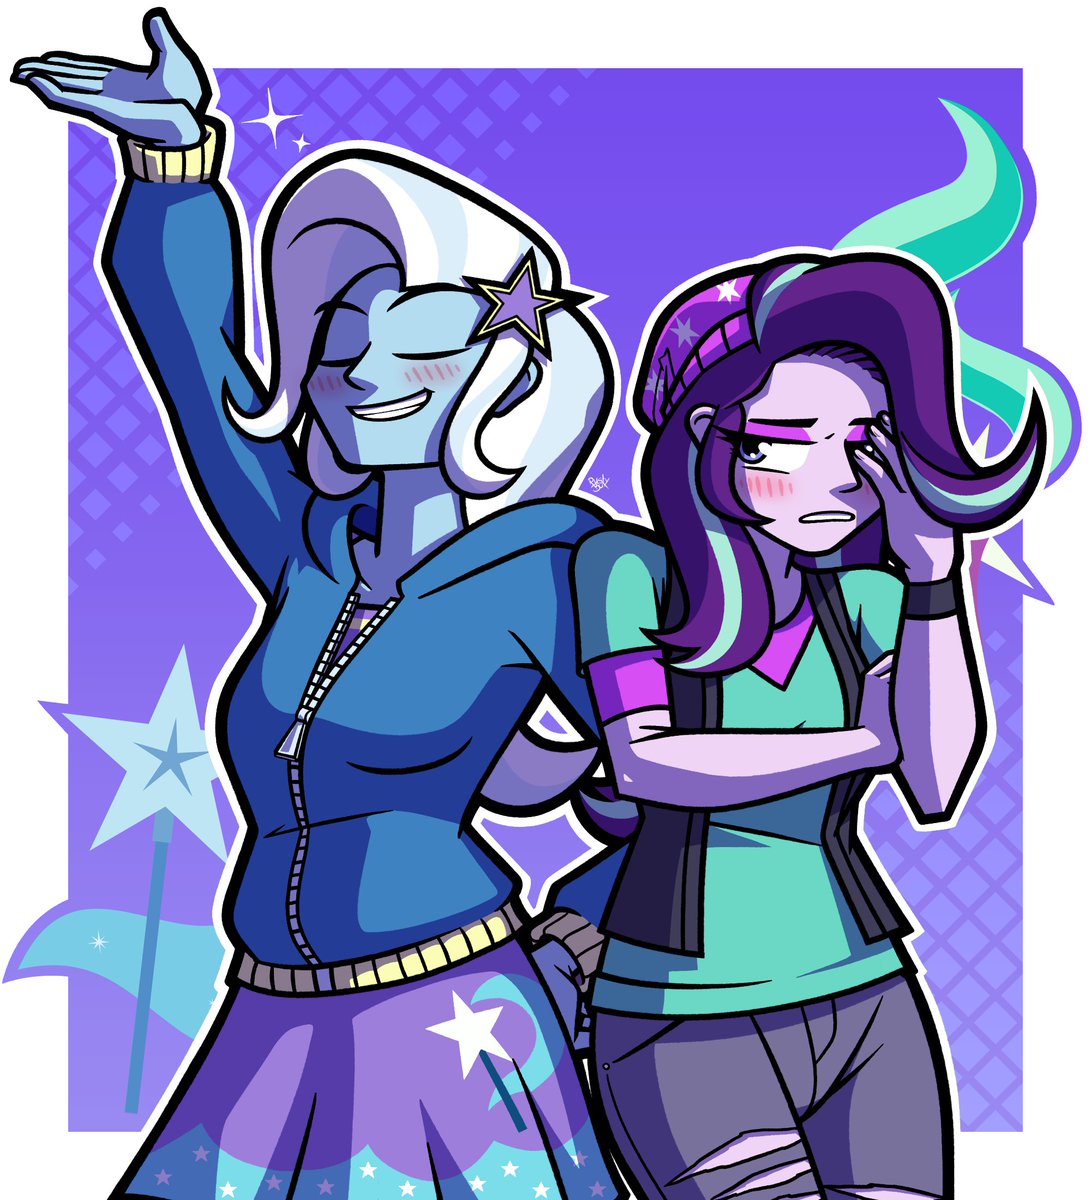 The Great and Powerful and the Glimmer 🪄💫
#mylittlepony #mlpfim #MLP #EquestriaGirls #TrixieLulamoon #StarlightGlimmer #fanart #art #digitalart